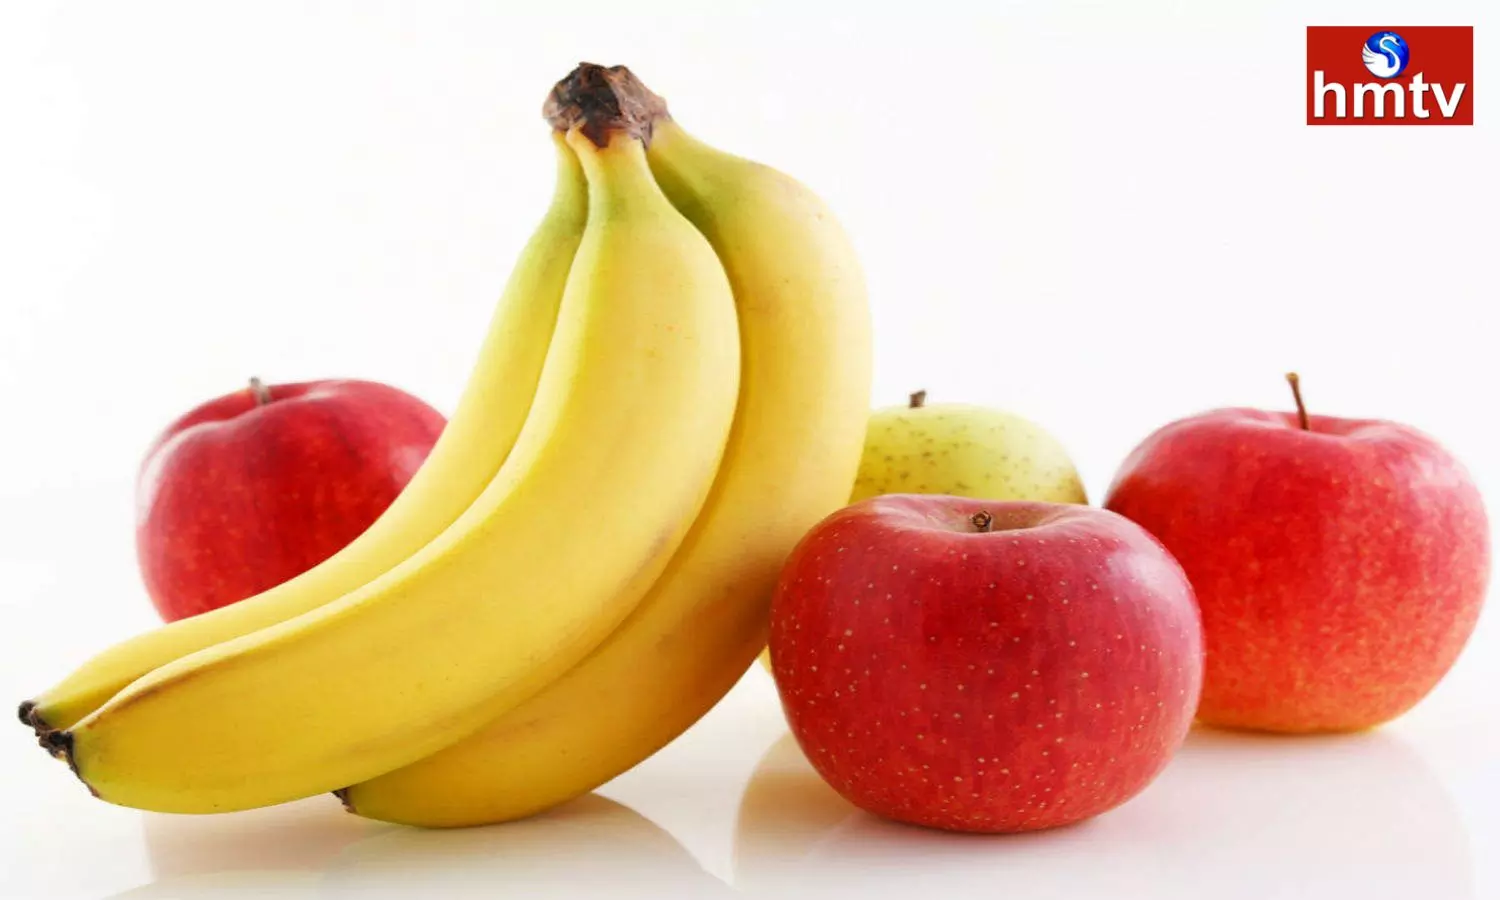 What is the difference between apple and banana in terms of nutrients